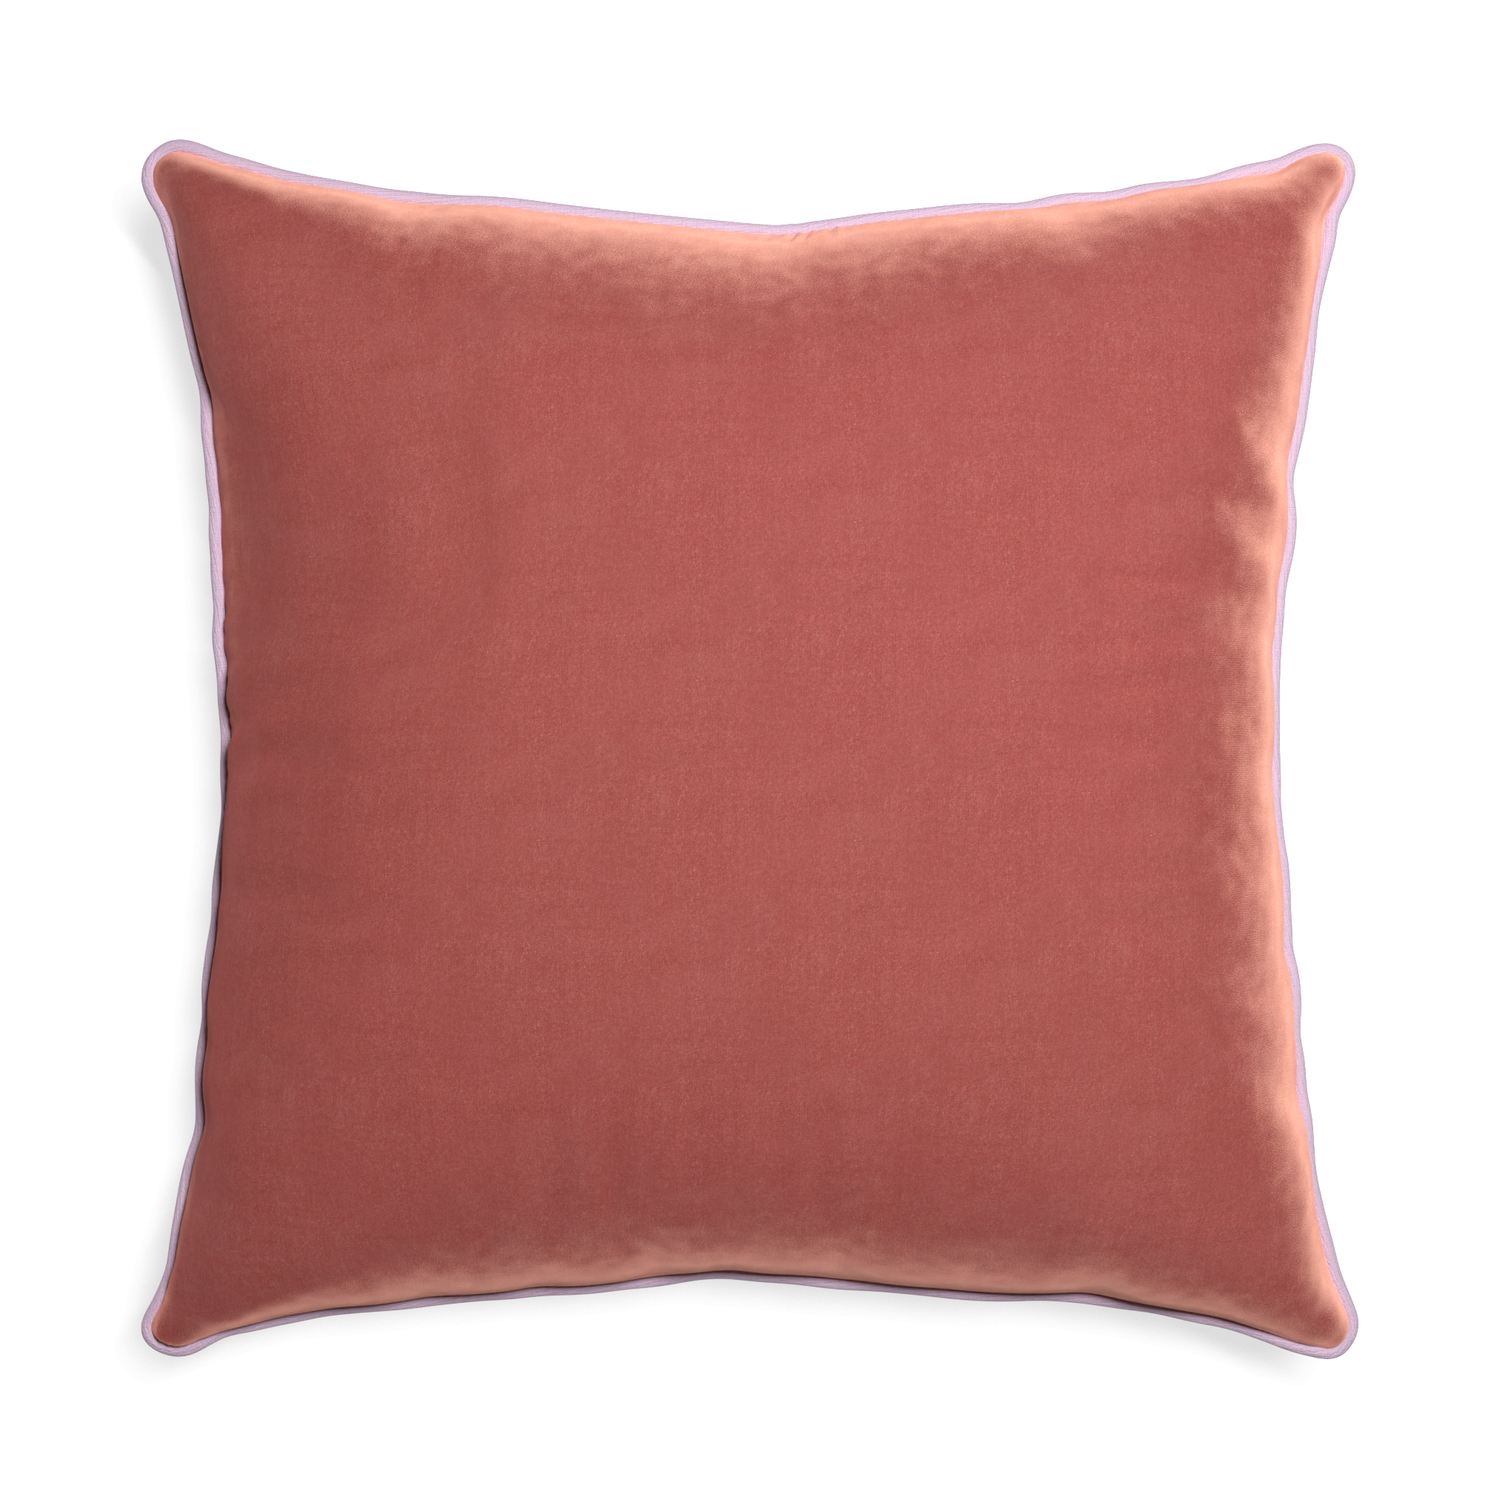 Euro-sham cosmo velvet custom coralpillow with l piping on white background